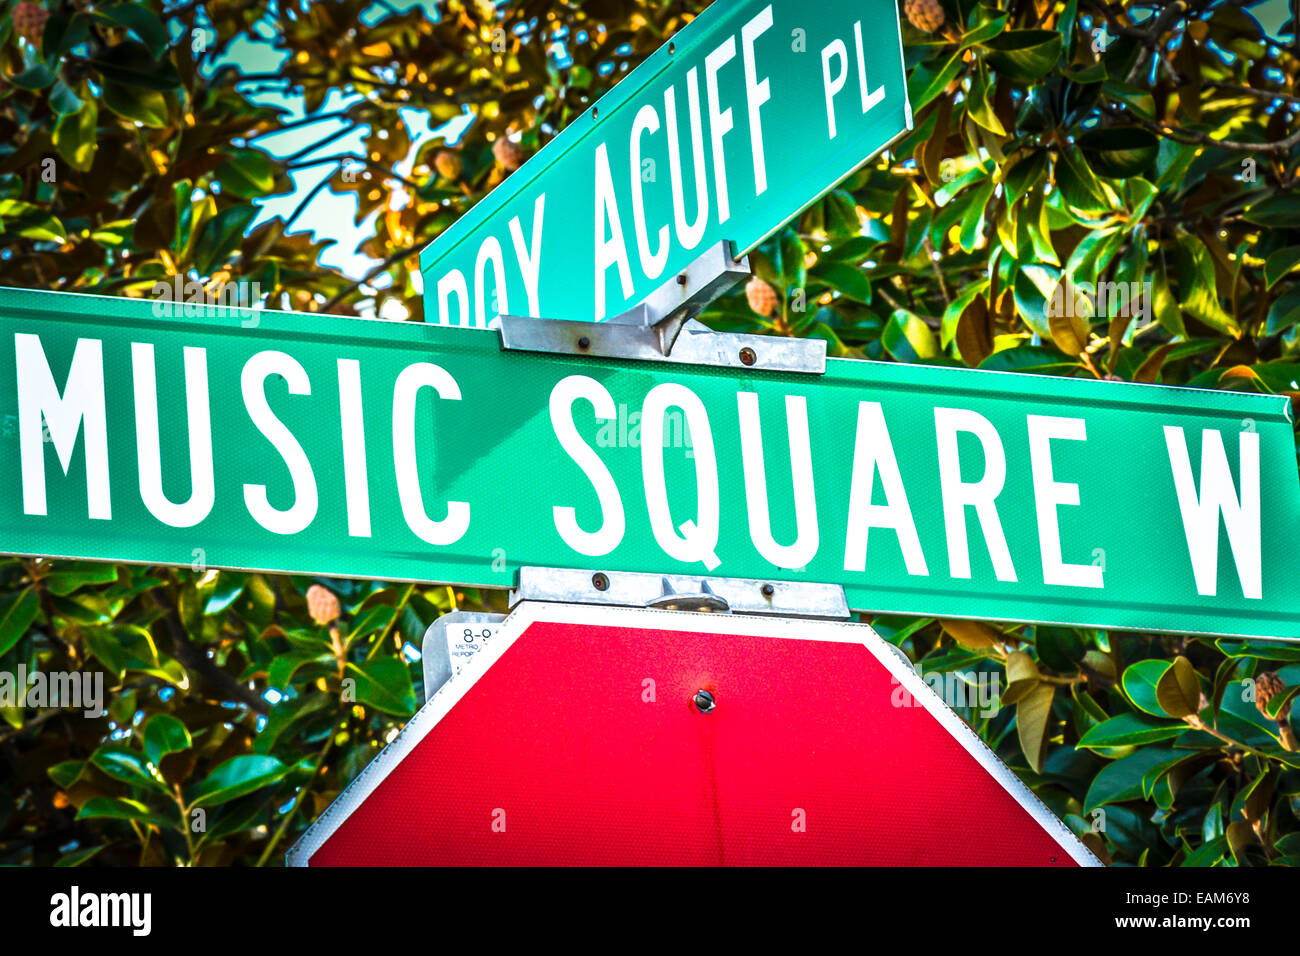 Street signs at intersection of Roy Acuff Place and Music Square West on Music row in Nashville, TN, USA Stock Photo